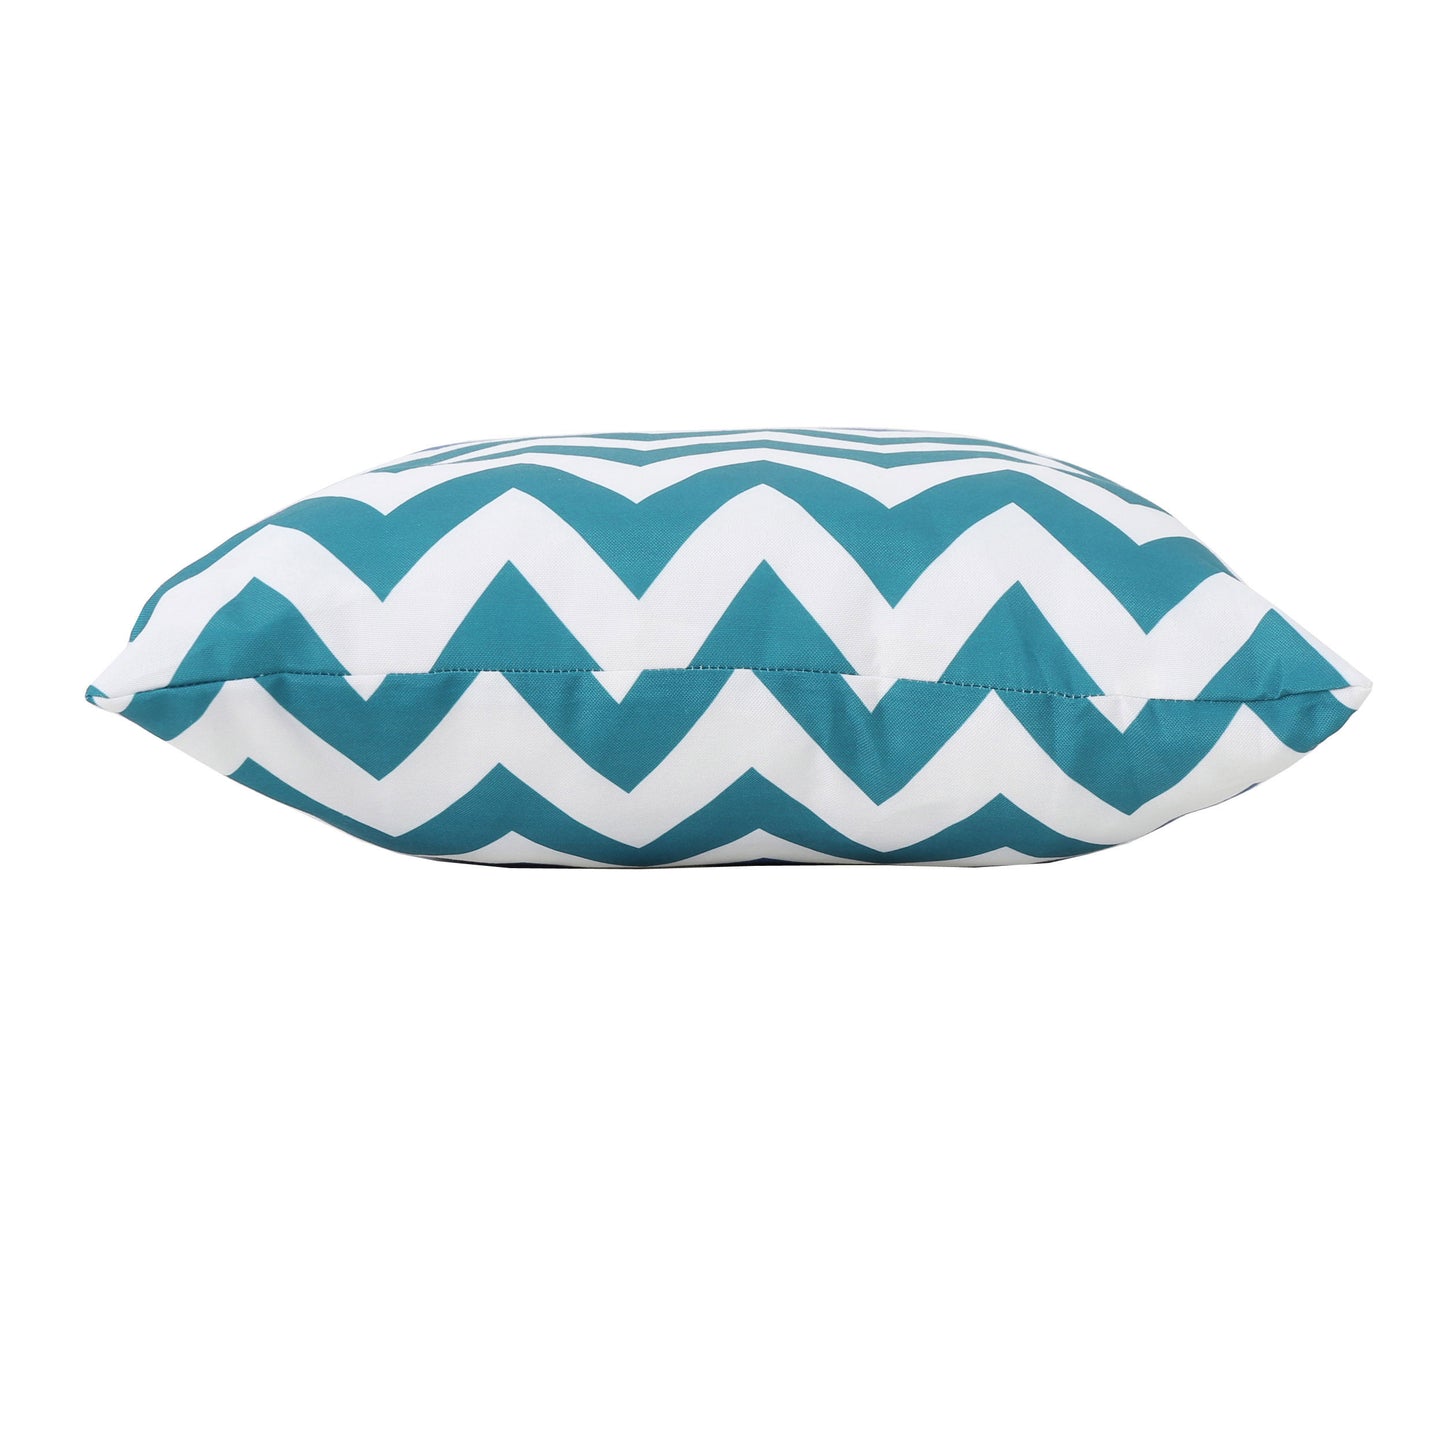 Ernest Indoor Zig Zag Striped Water Resistant Square Throw Pillows (Set of 2)